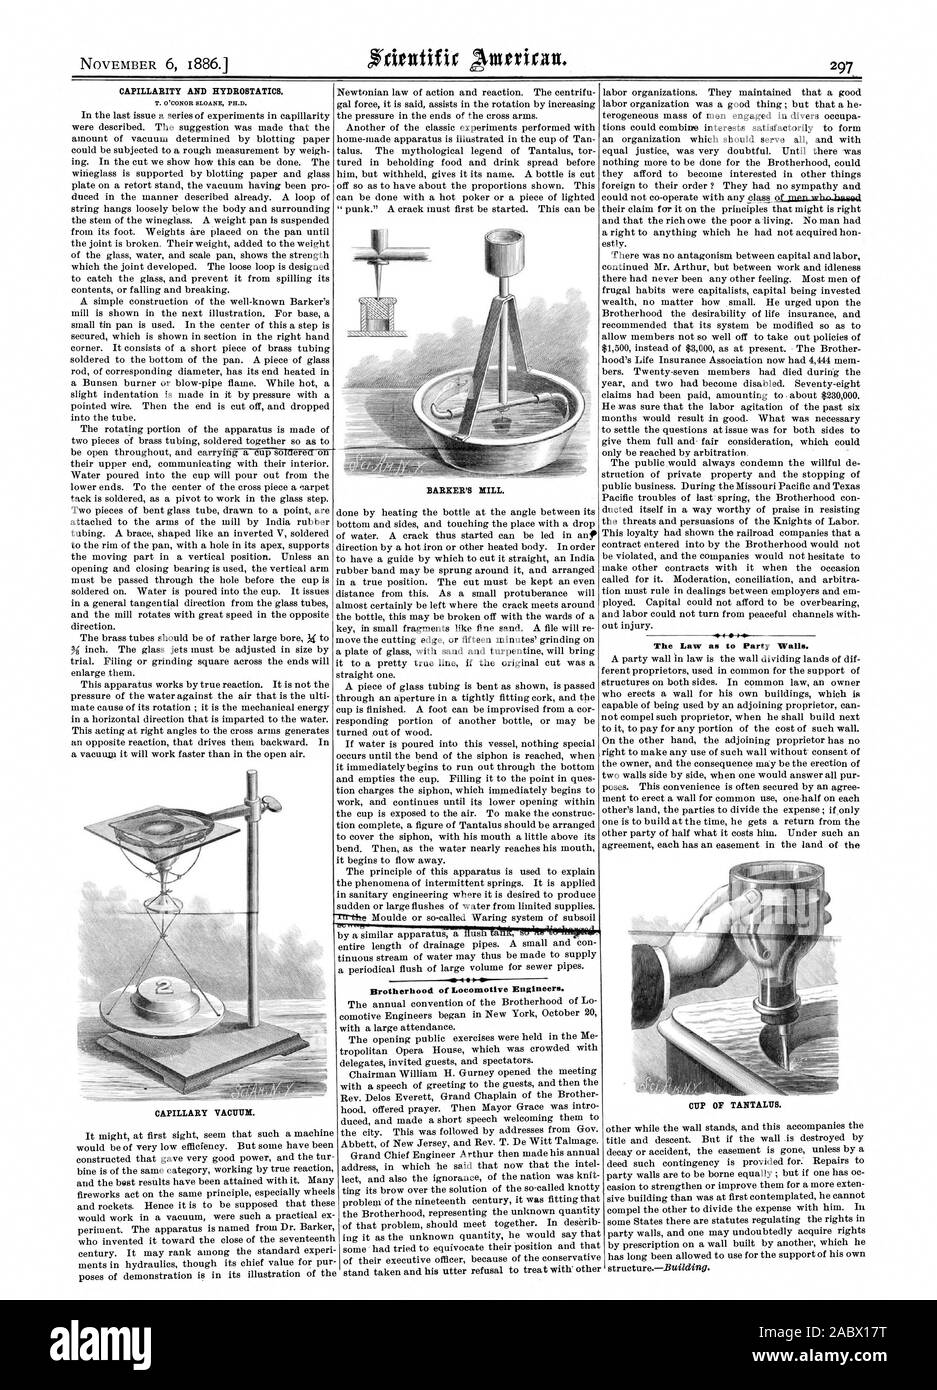 BARKER'S KILL. Brotherhood of Locomotive Engineers. CAPILLARY VACUUM. The Law as to Party Walls. CUP OF TANTALUS., scientific american, 1886-11-06 Stock Photo